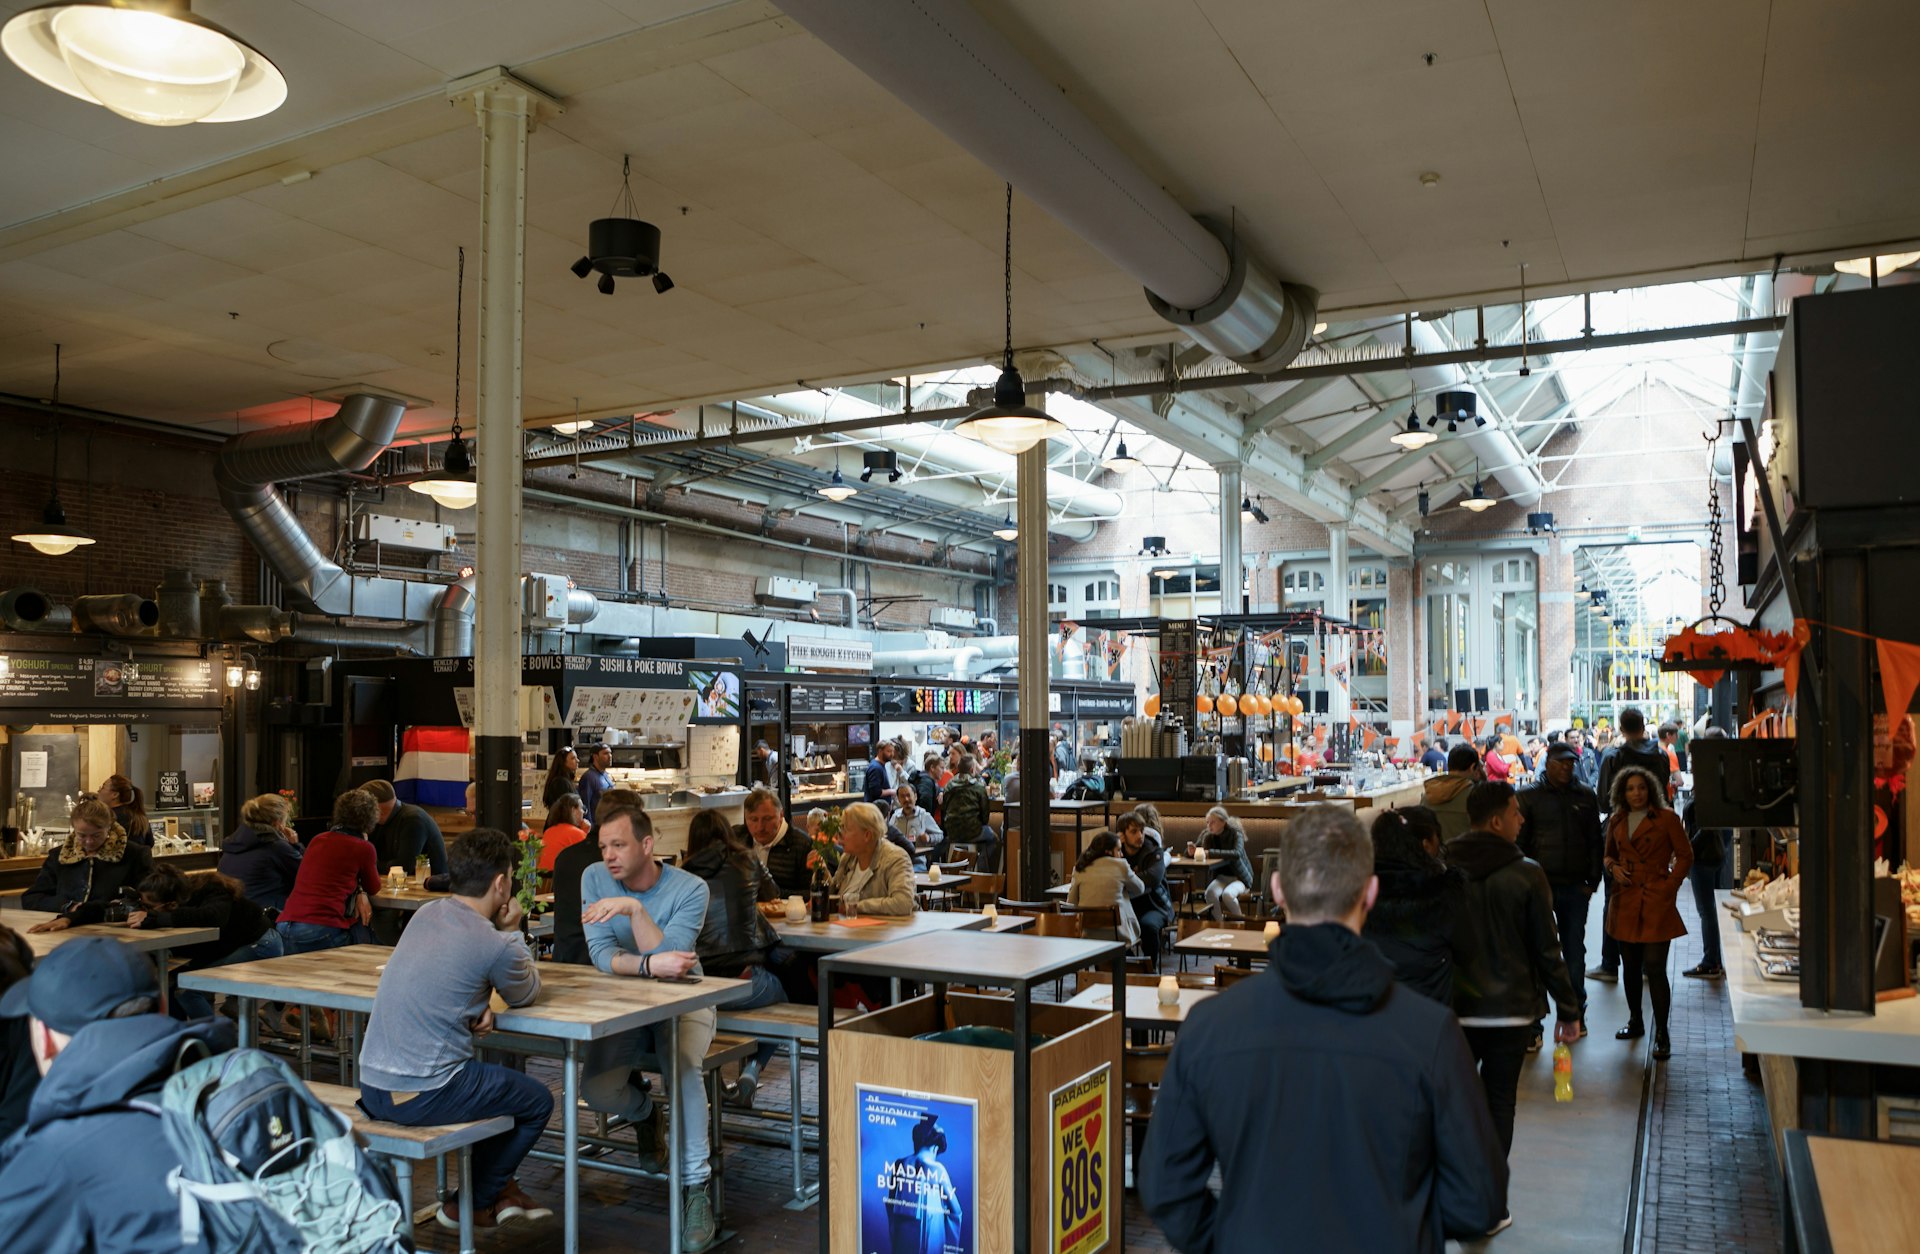 The interior of Foodhallen in Amsterdam with people eating at shared tables